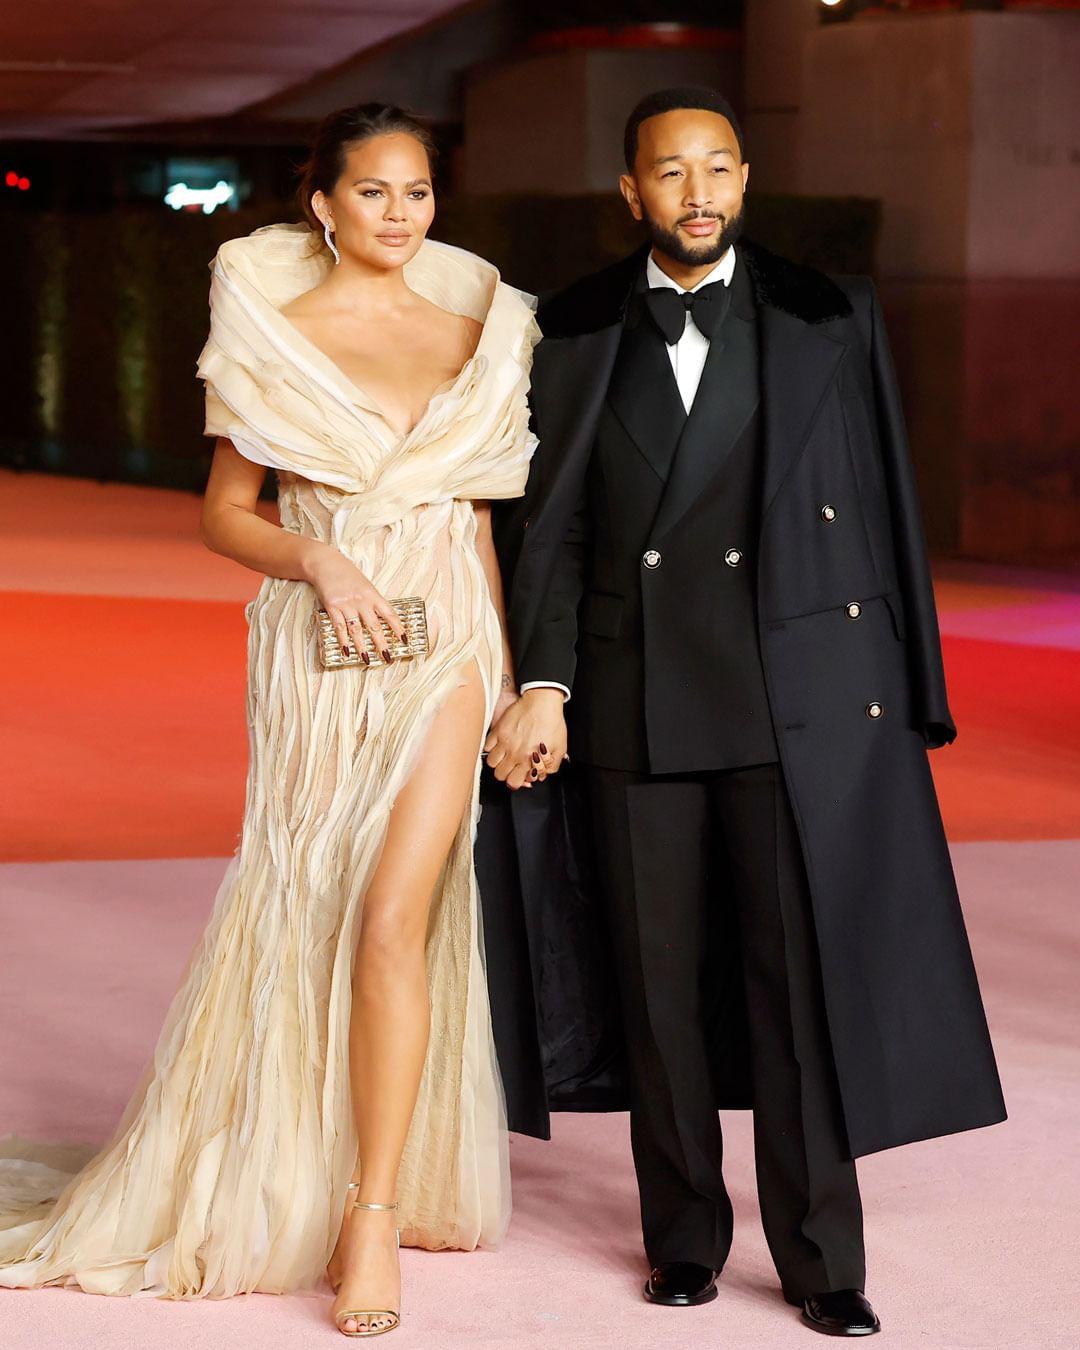 Chrissy Teigen wore a textured cream gown by Tony Ward. She posed with husband John Legend